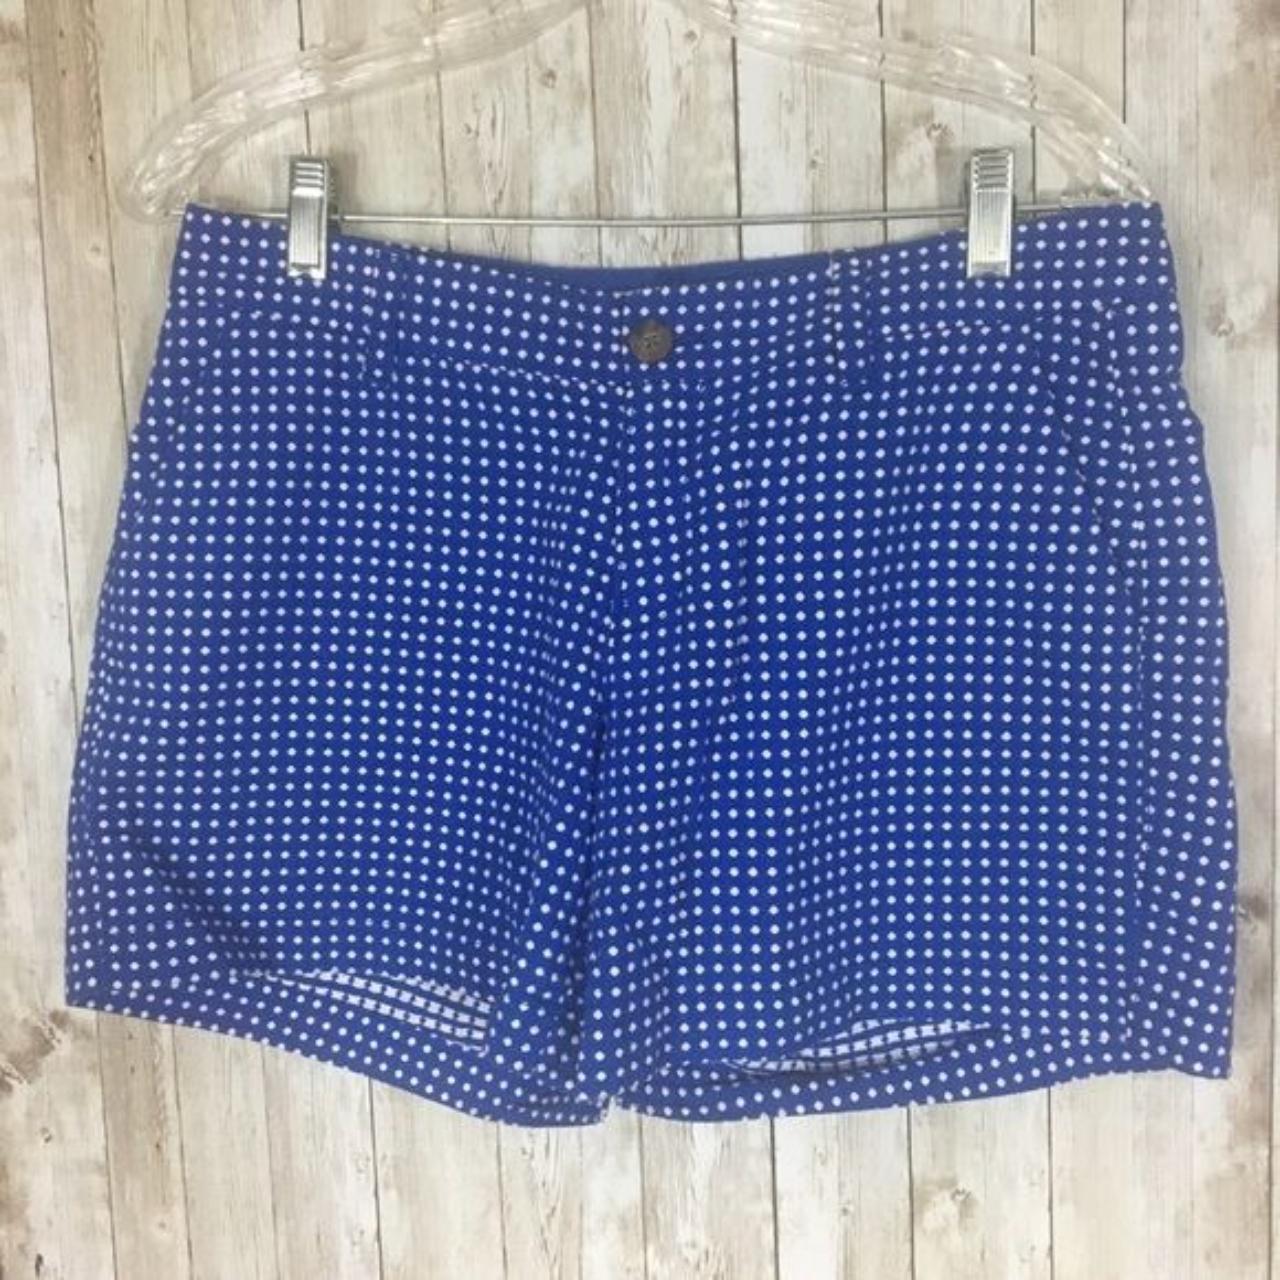 Old Navy Women's Blue and White Shorts | Depop